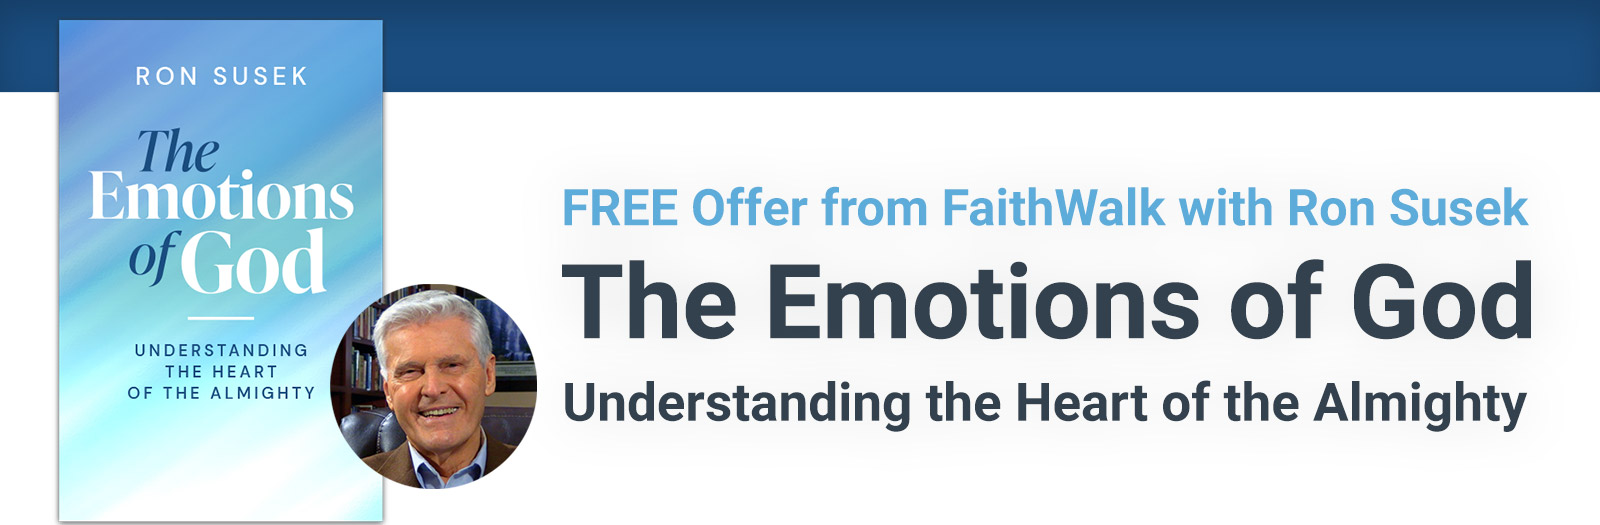 The Emotions of God - Understanding the Heart of the Almighty | Free Offer from FaithWalk with Ron Susek